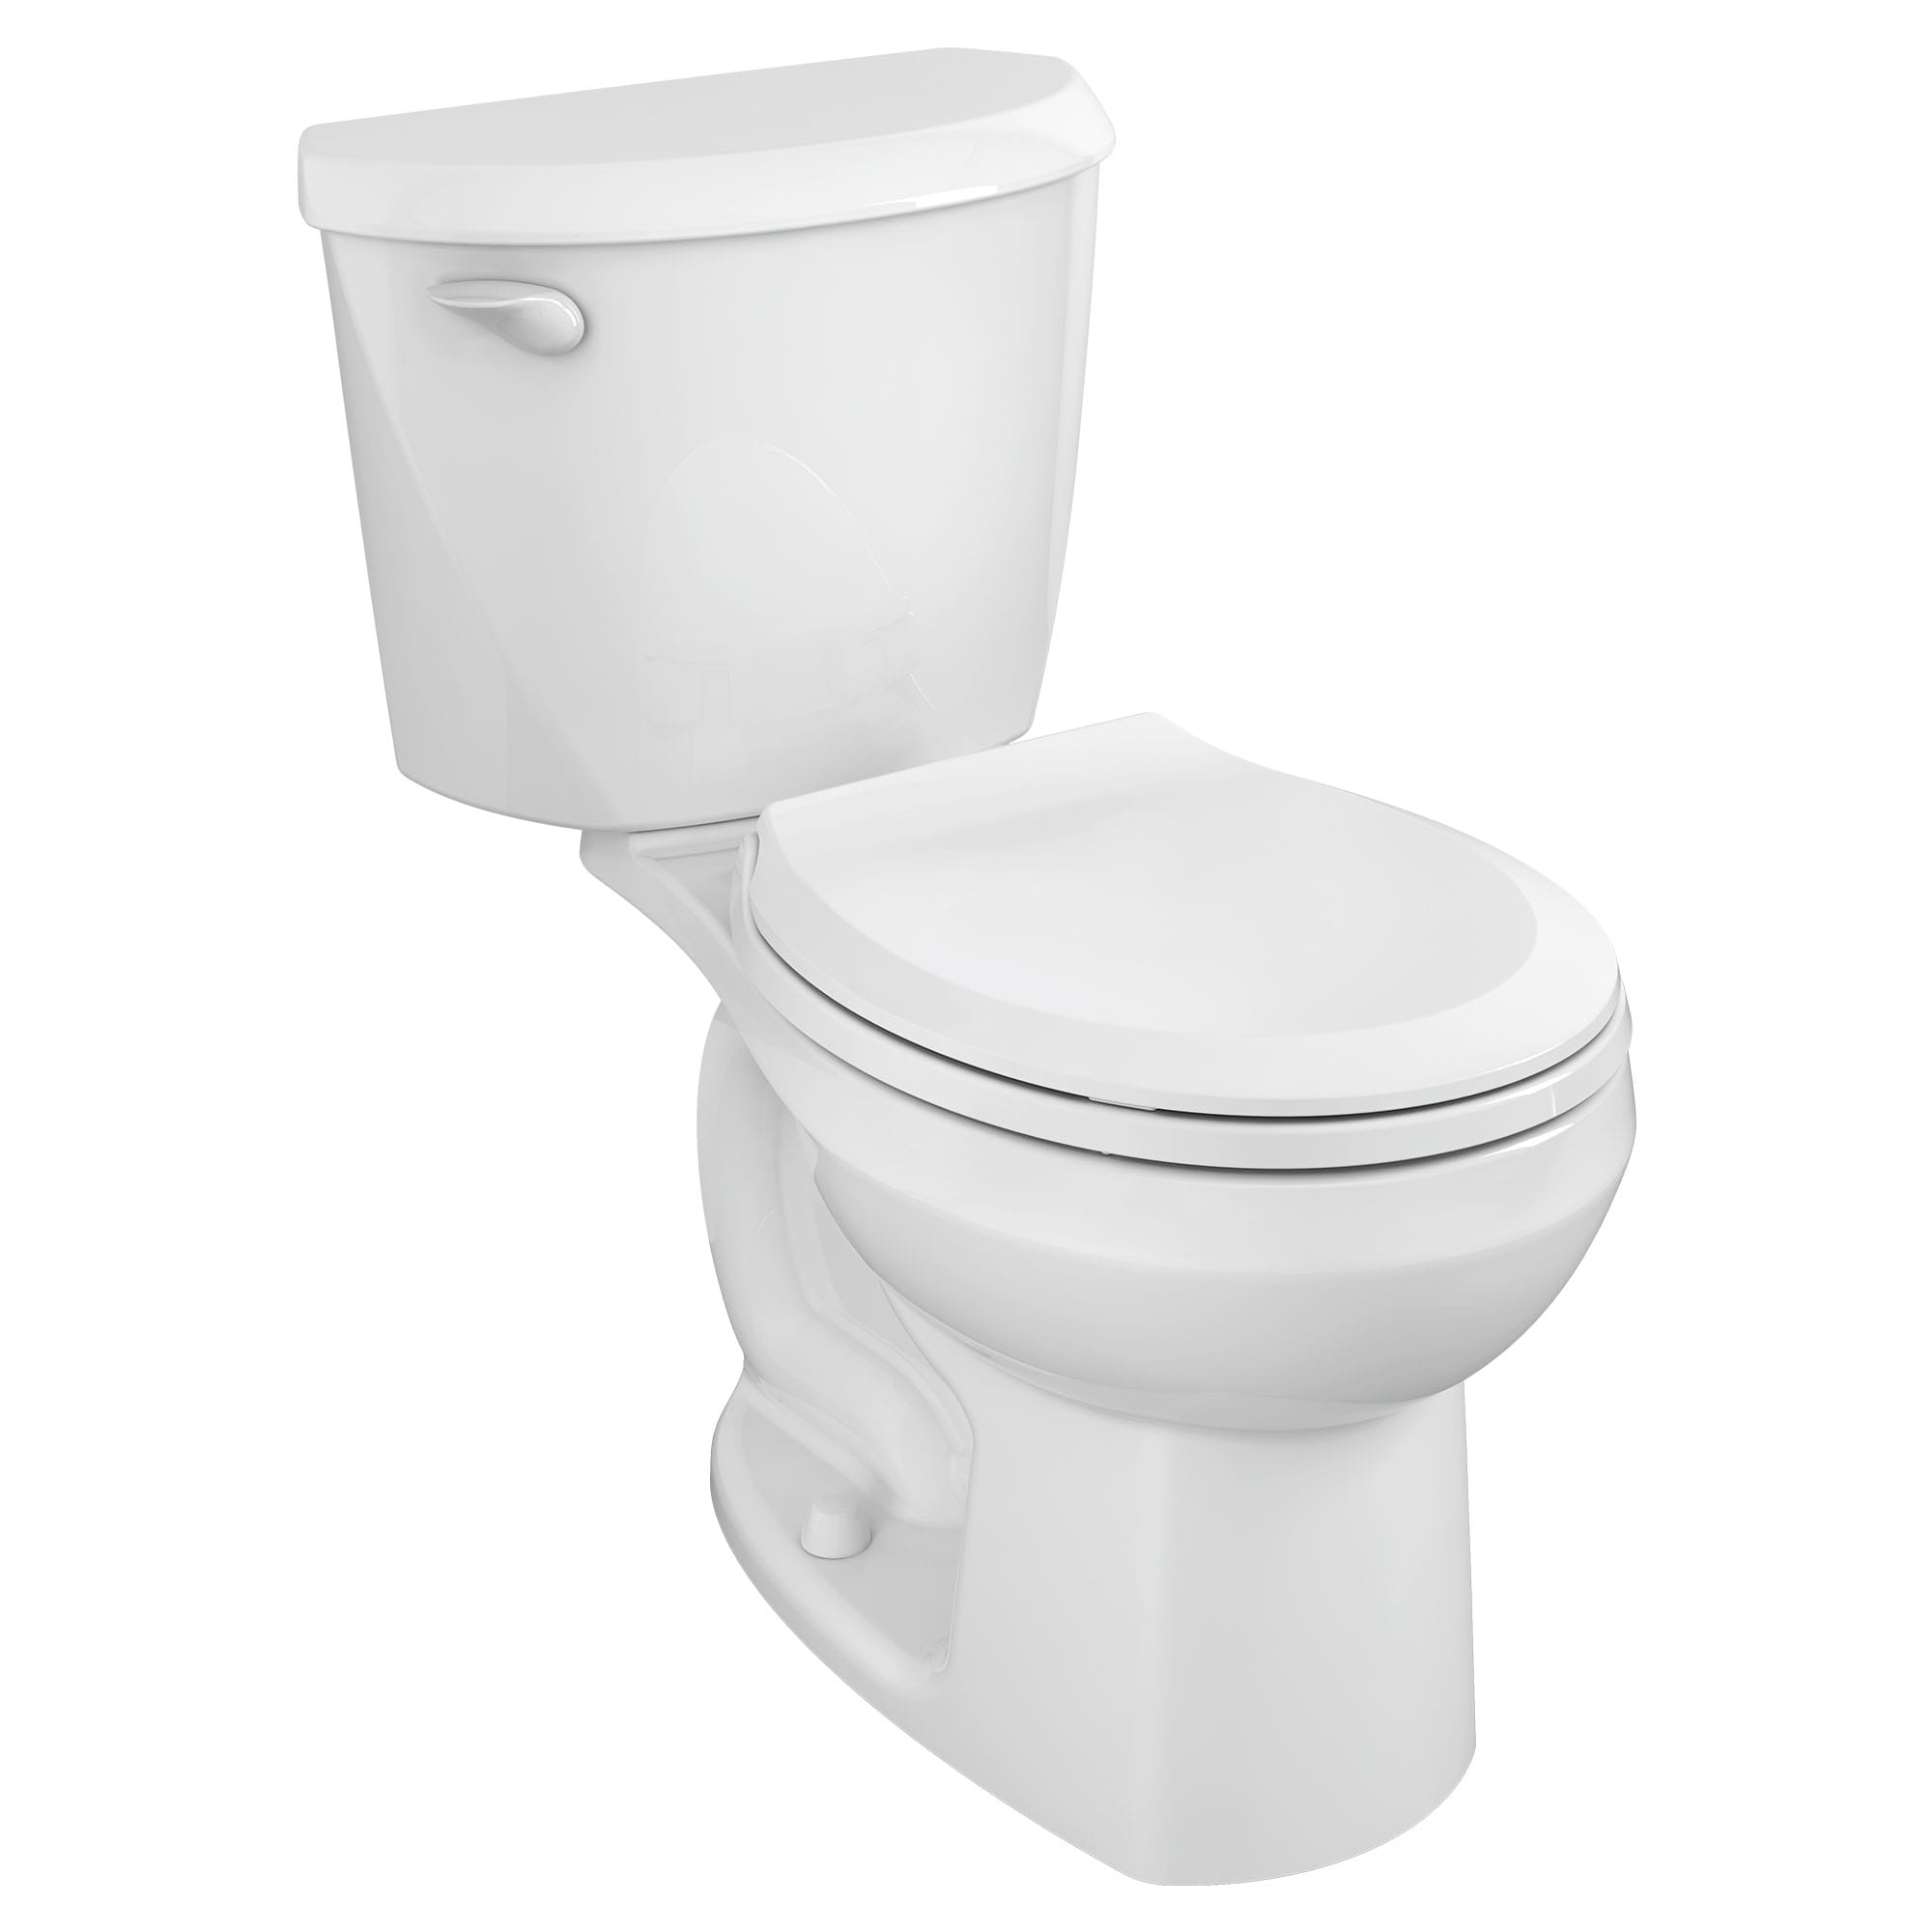 Colony® Two-Piece 1.28 gpf/4.8 Lpf Standard Height Round Front Toilet Less Seat